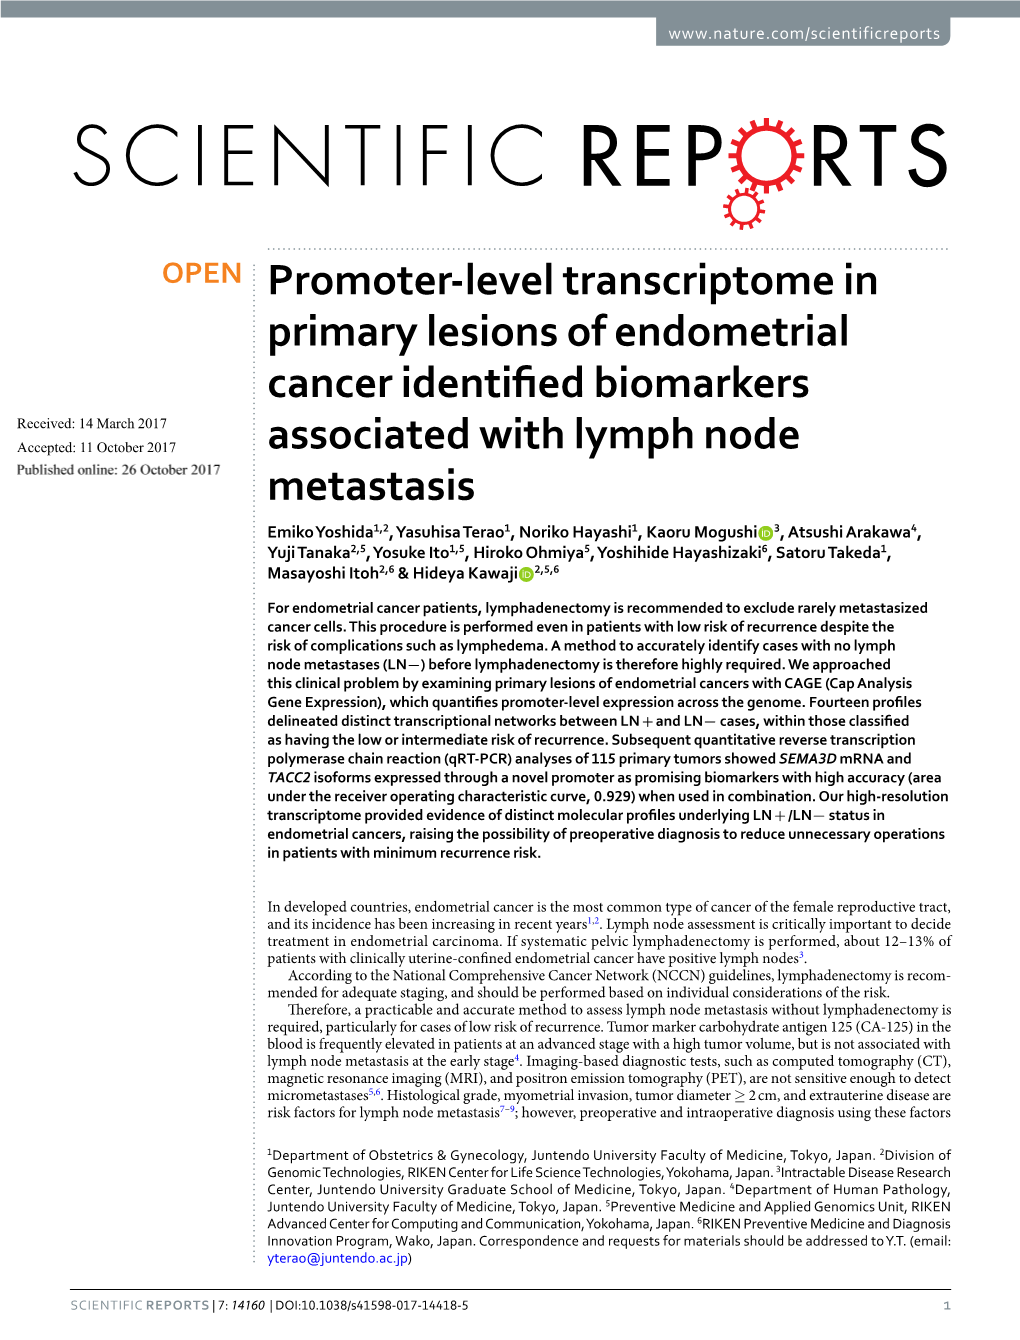 Promoter-Level Transcriptome in Primary Lesions of Endometrial Cancer Identified Biomarkers Associated with Lymph Node Metastasi